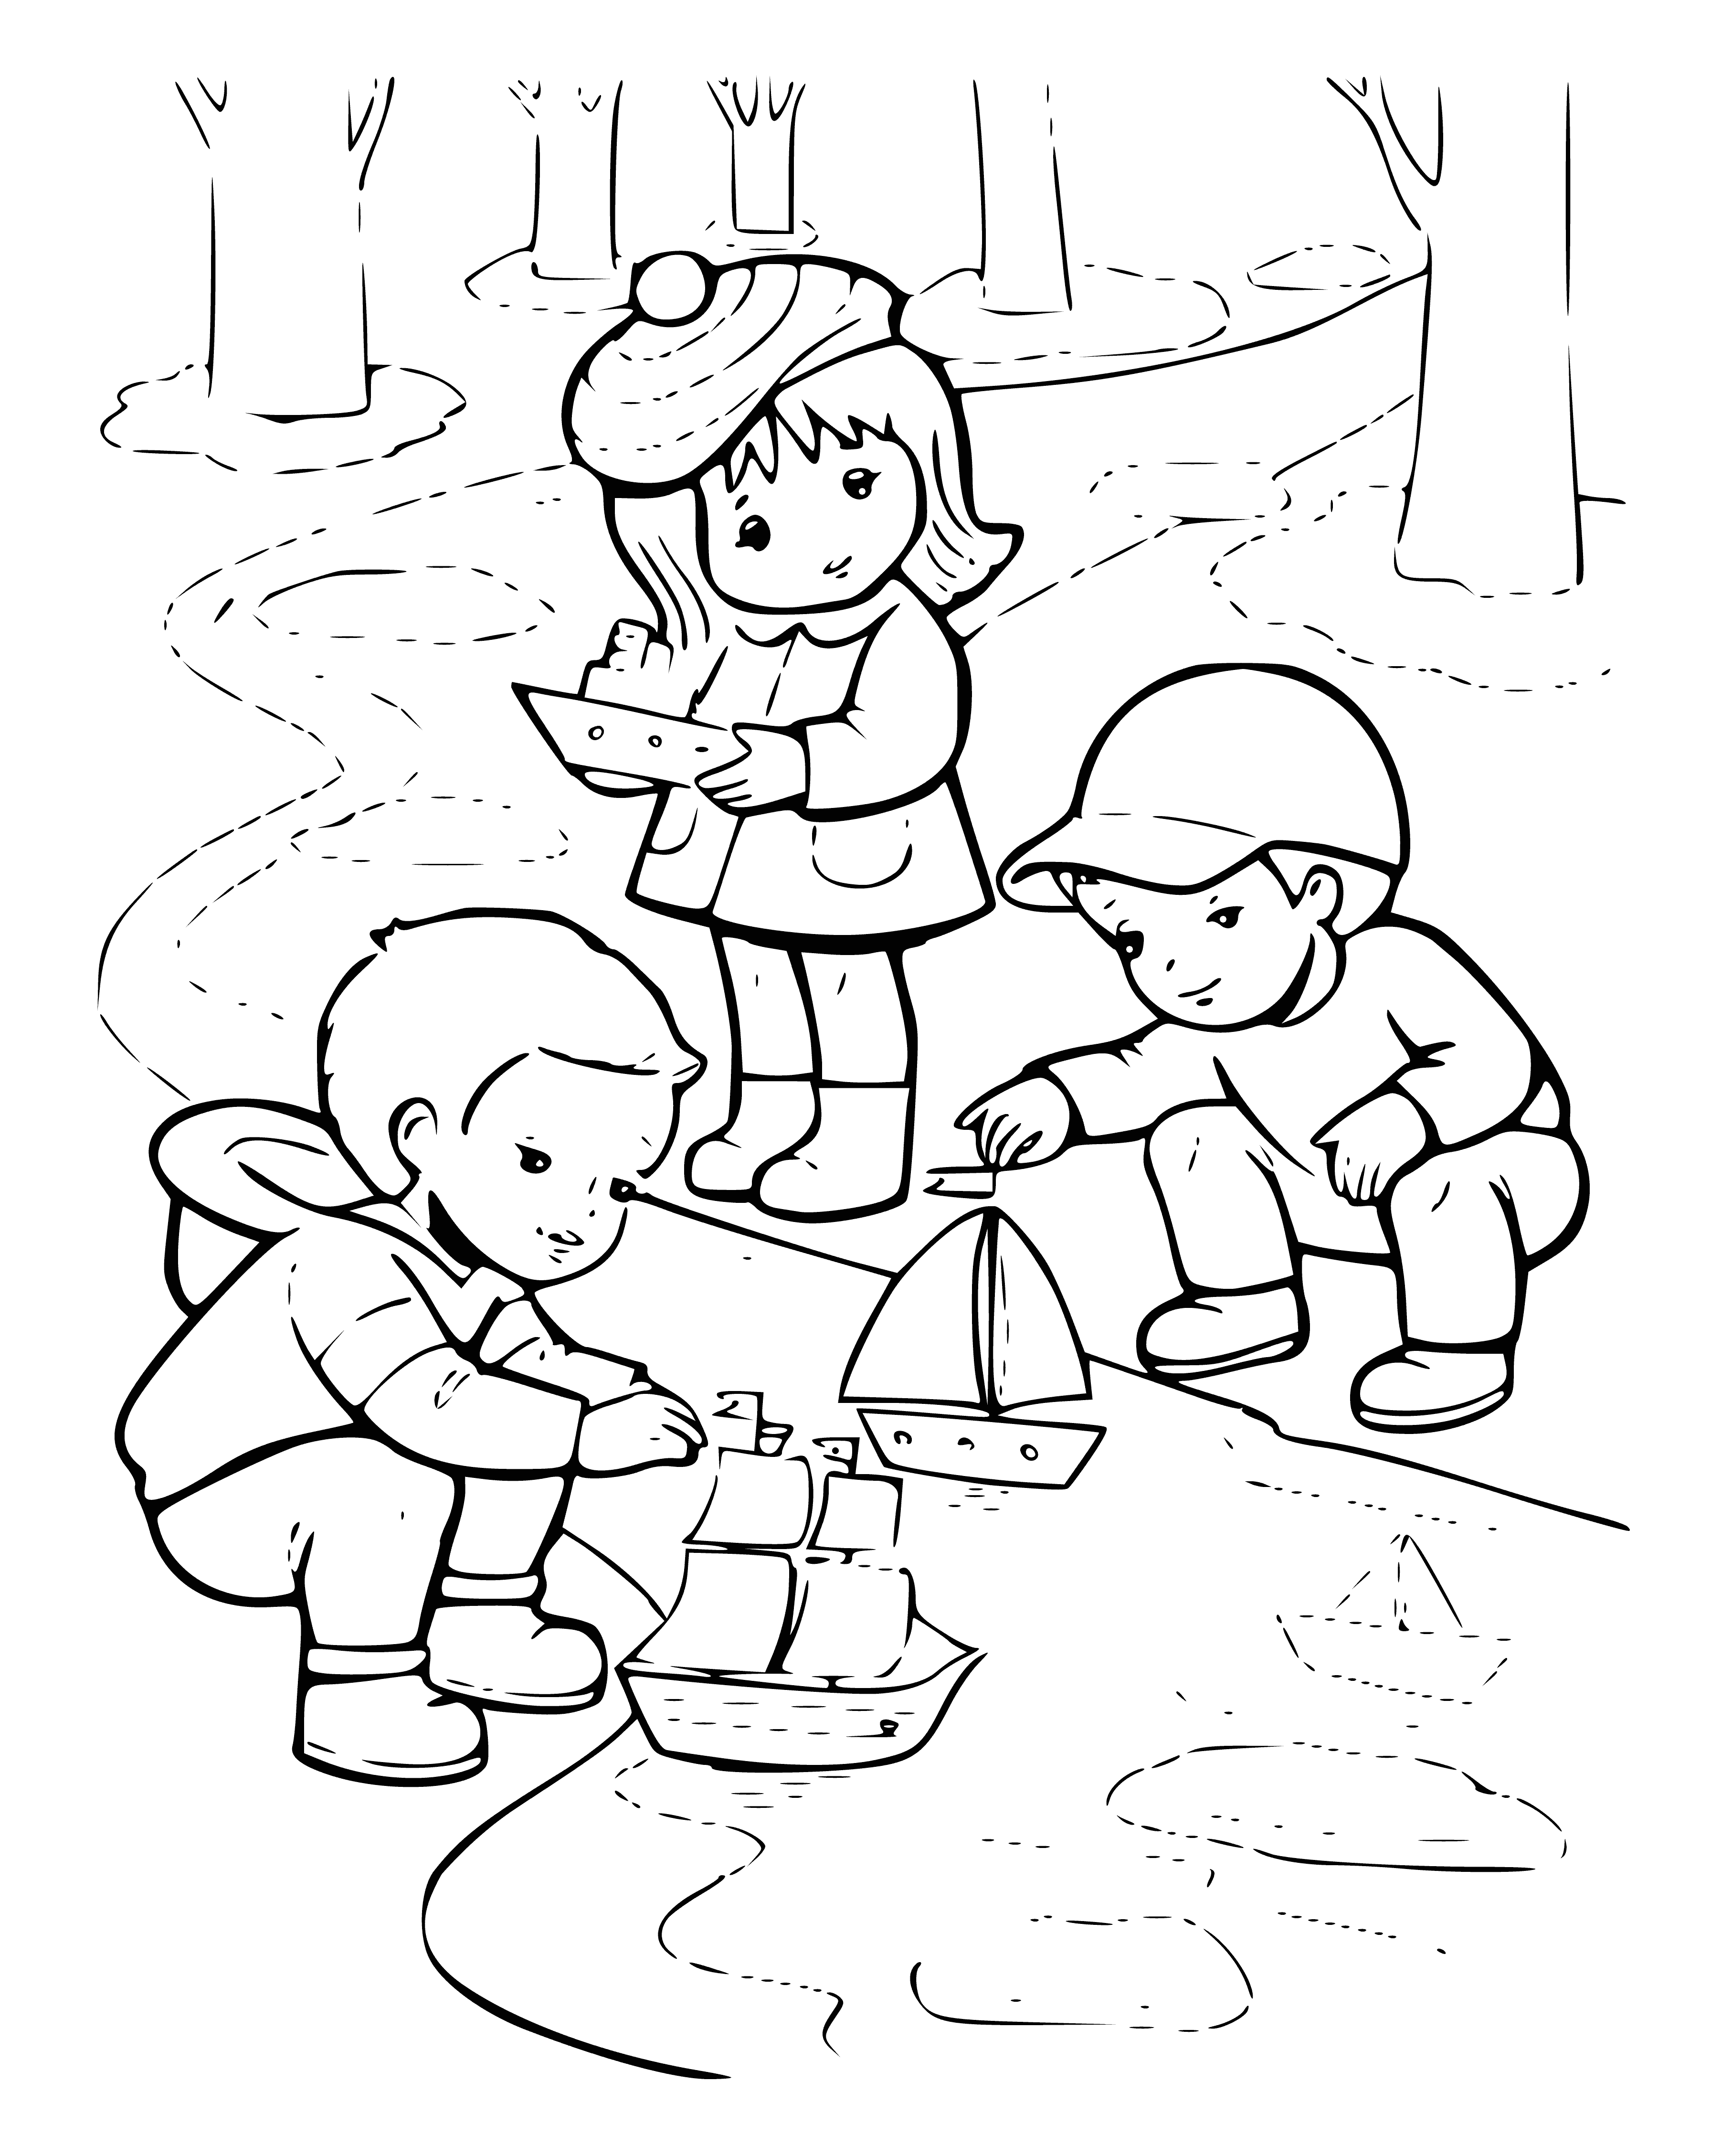 Spring boats coloring page